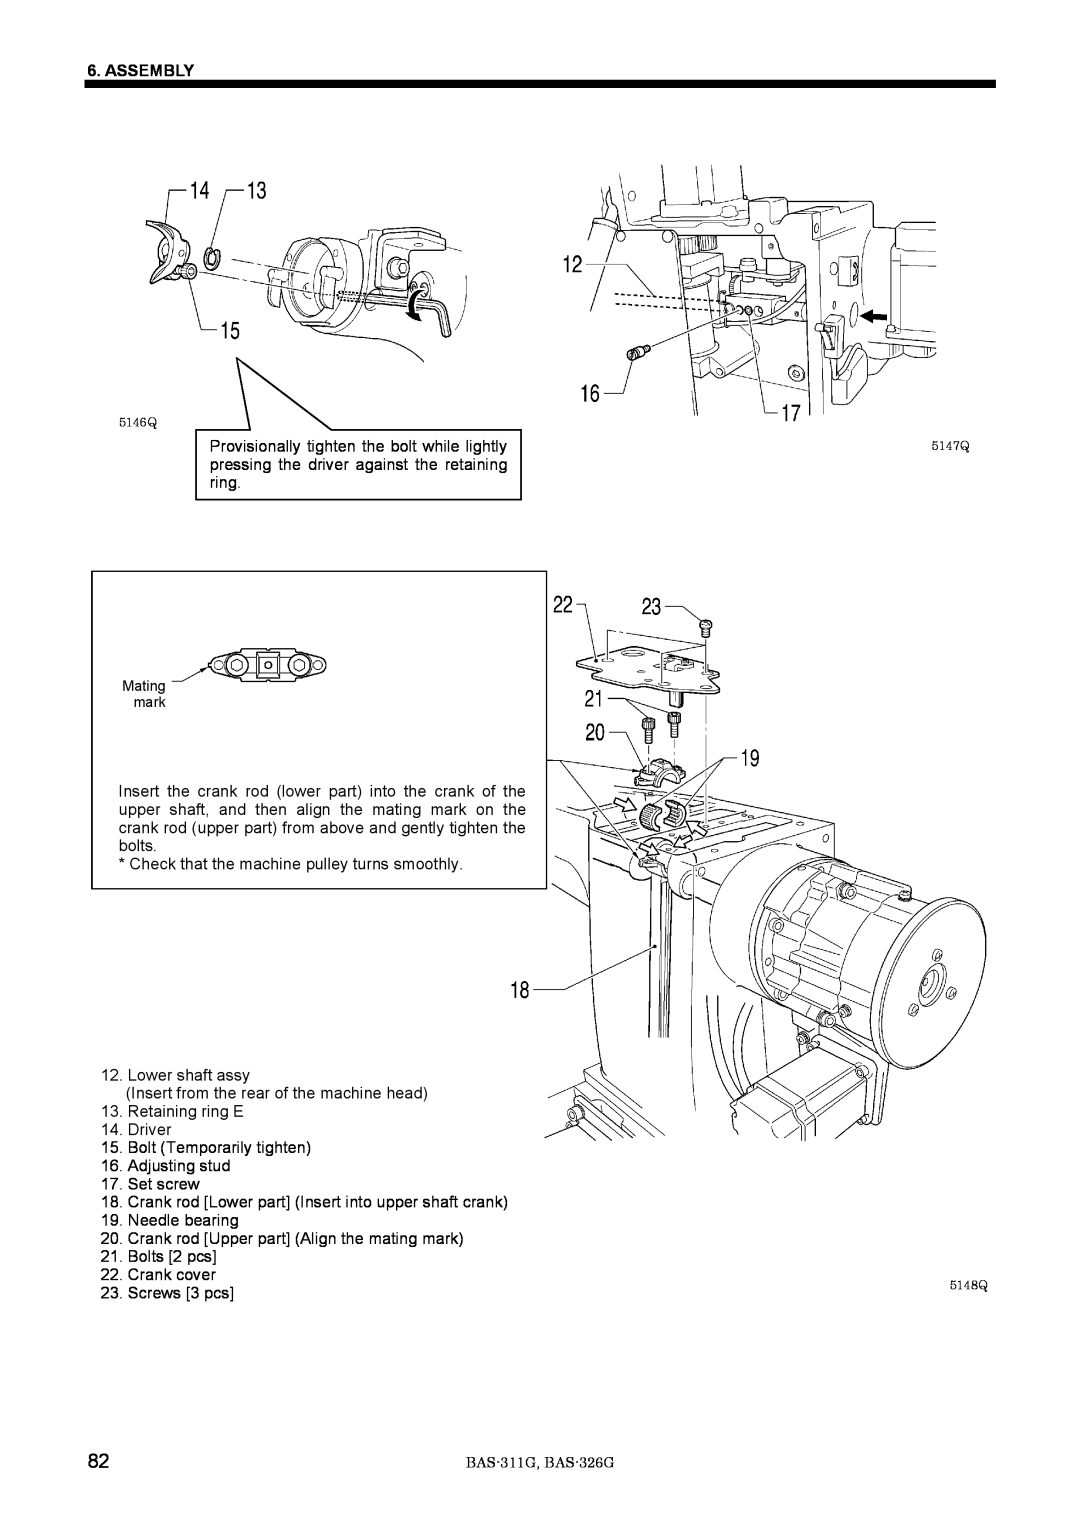 Brother BAS-311G service manual Assembly, Check that the machine pulley turns smoothly 12. Lower shaft assy 